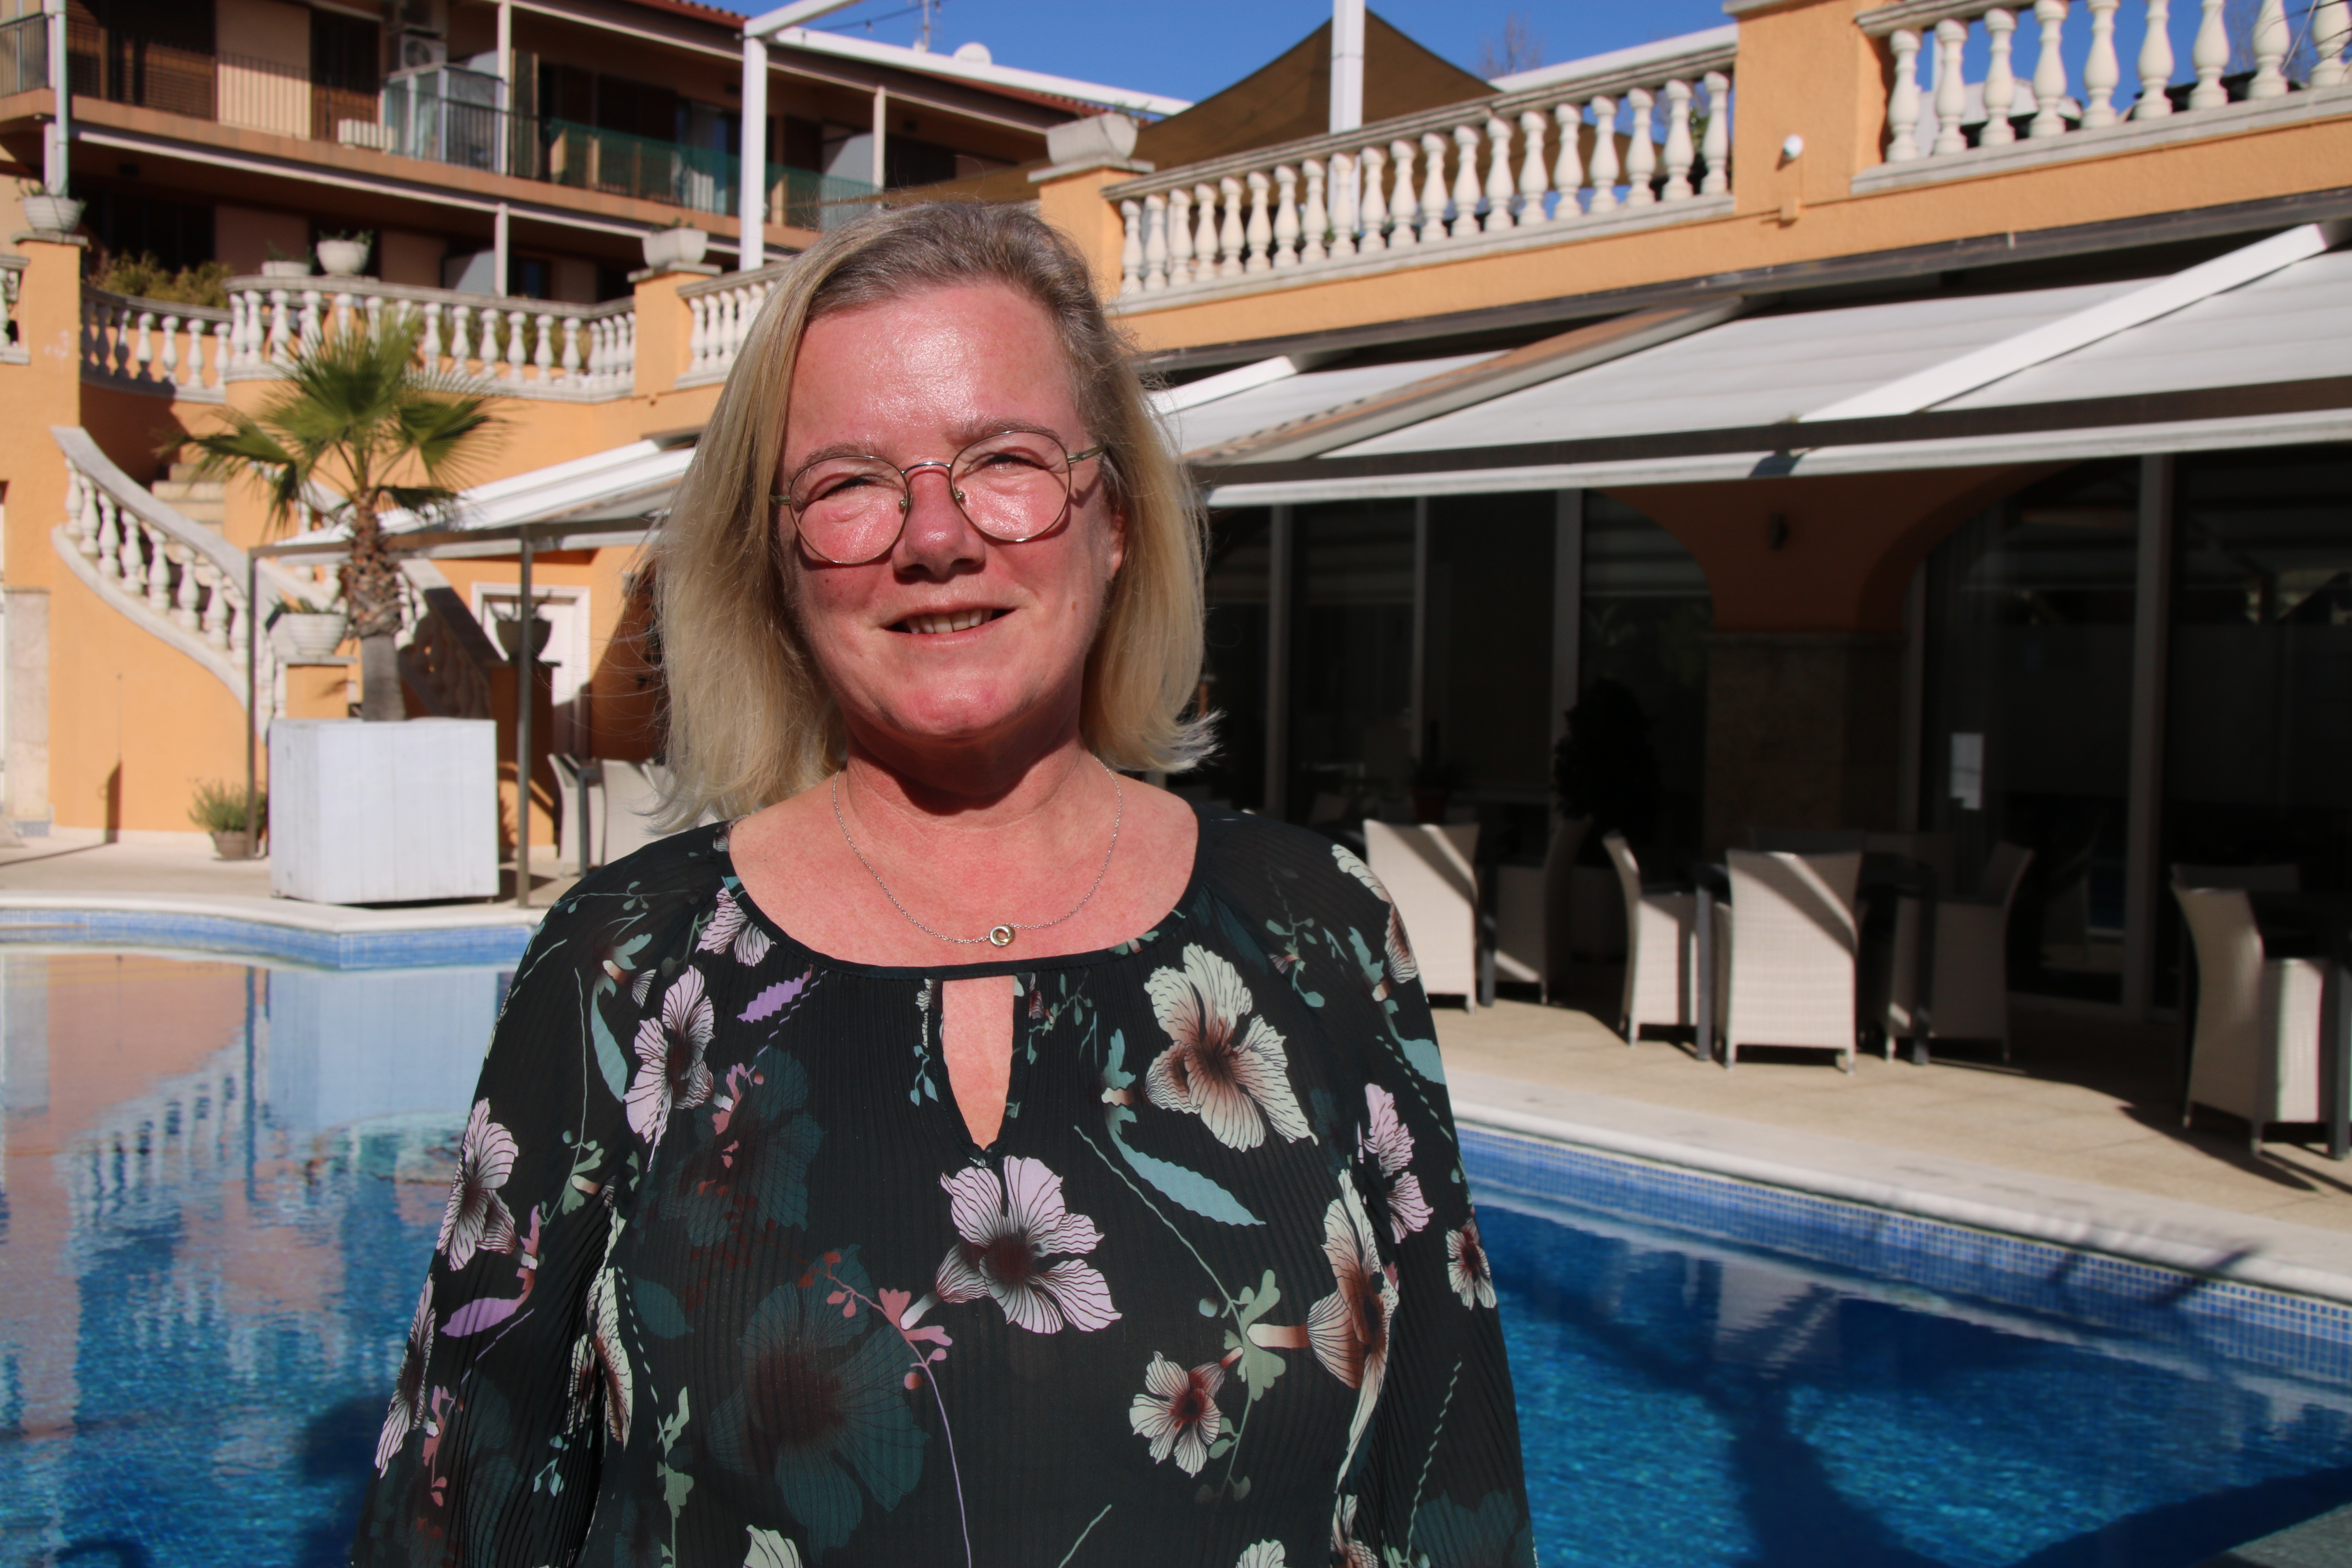 Hotel Barcarola's general manager, Ylonka van Veenendaal, at the newly covered pool